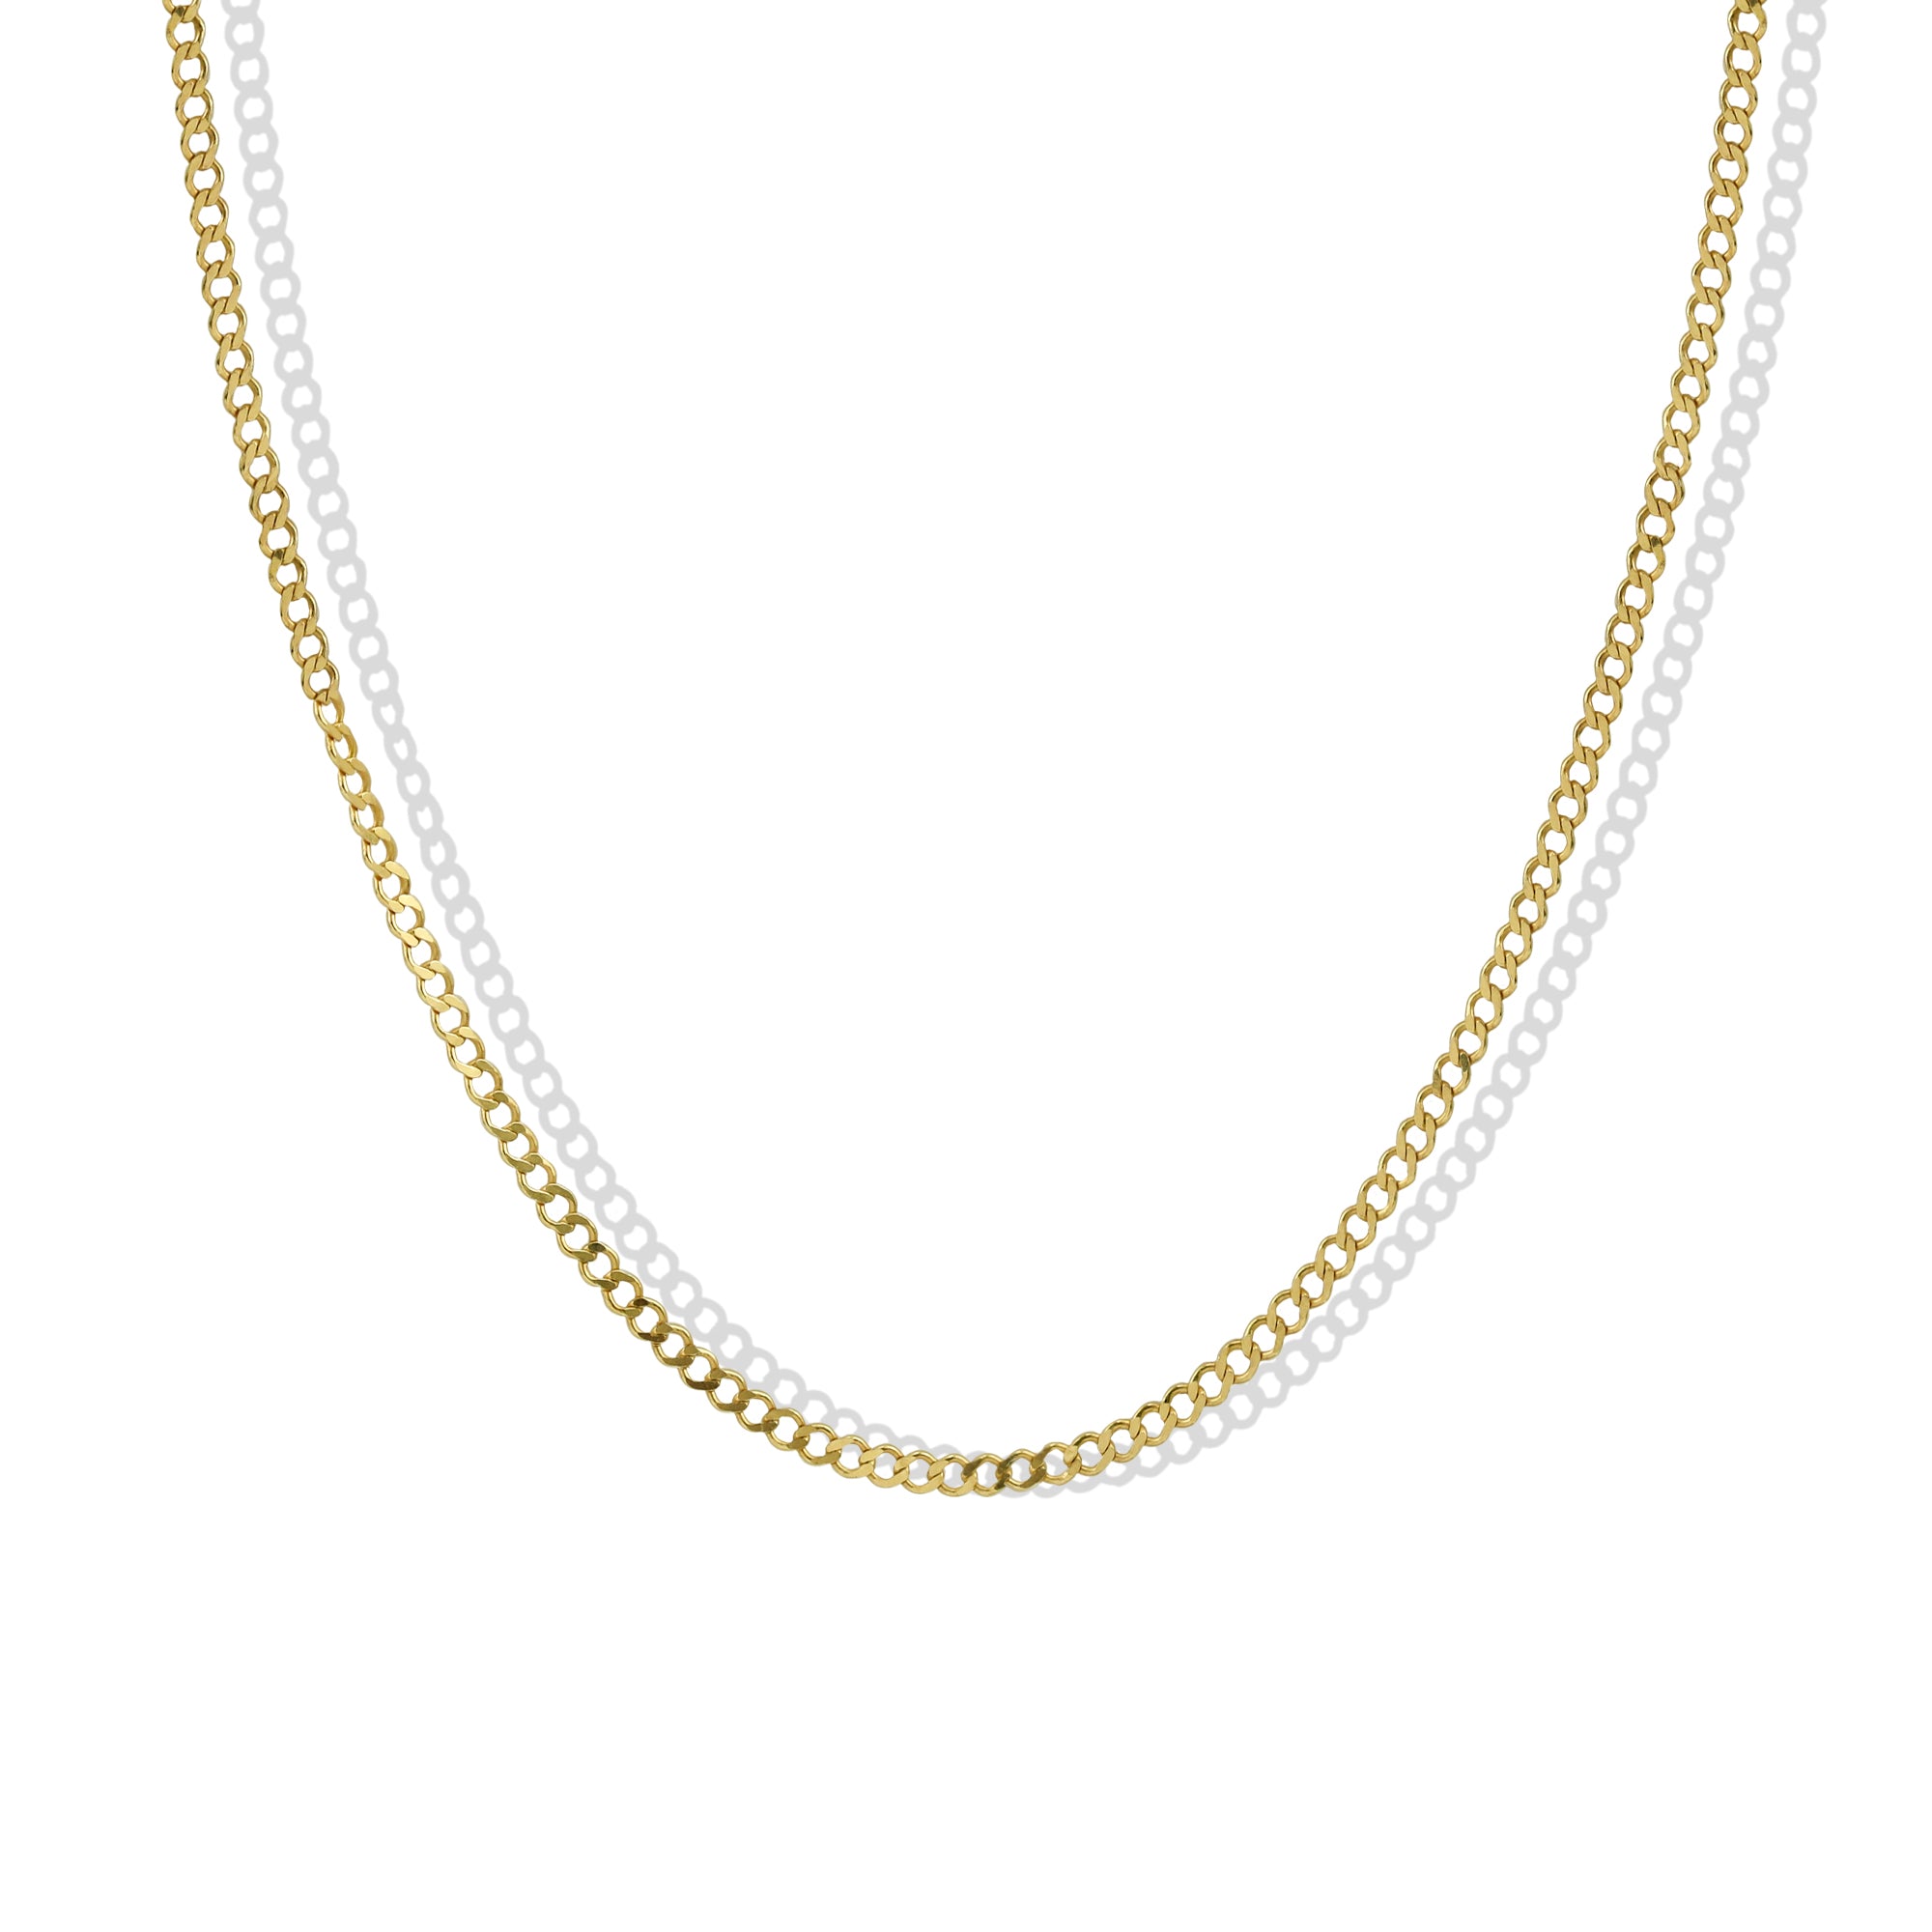 THE DAINTY CHAIN NECKLACE